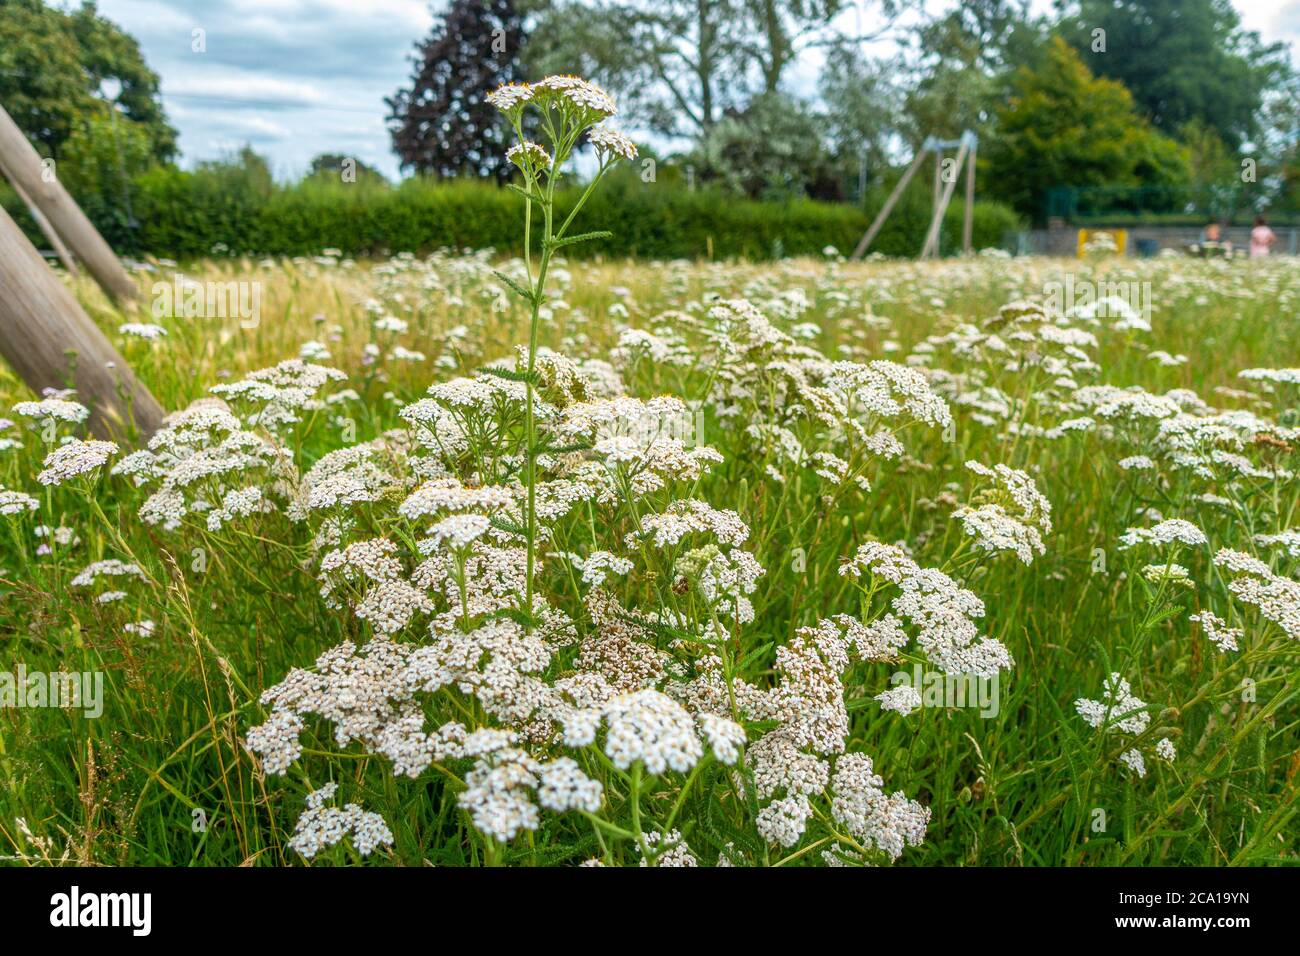 Achillea millefolium or Common Yarrow with white flowers growingin a park in the K. Stock Photo